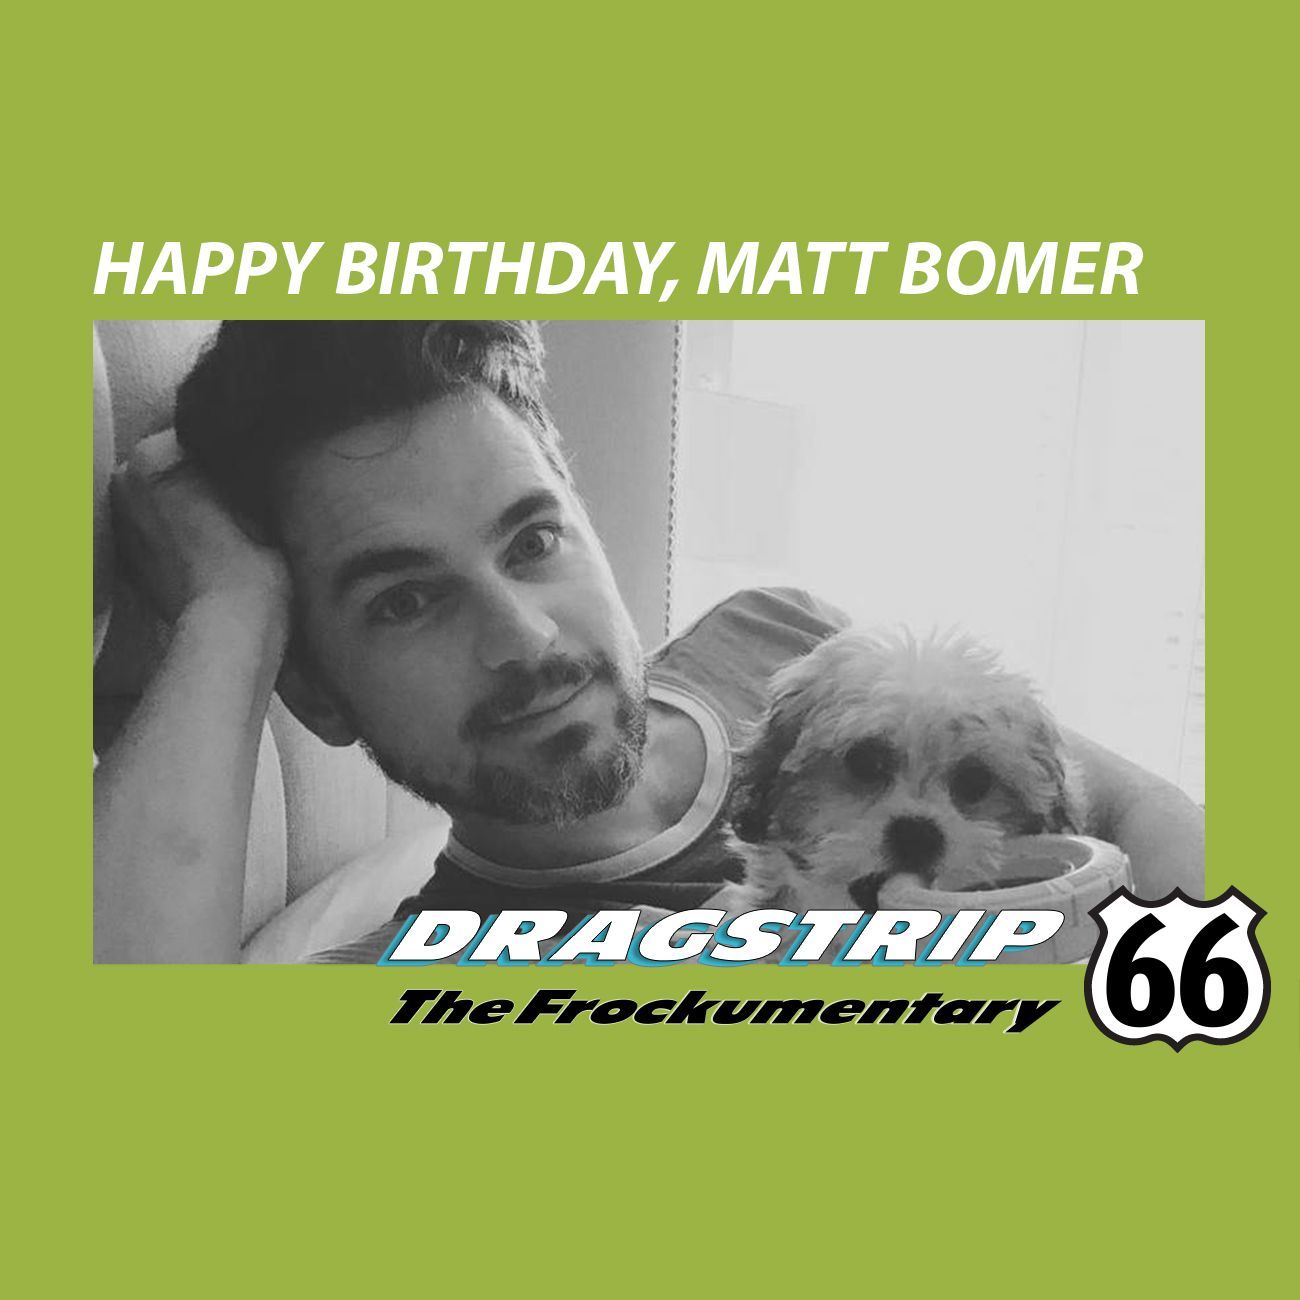 Happy Birthday to Matt Bomer from Dragstrip 66 the Frockumentary. FROCK ON!!   